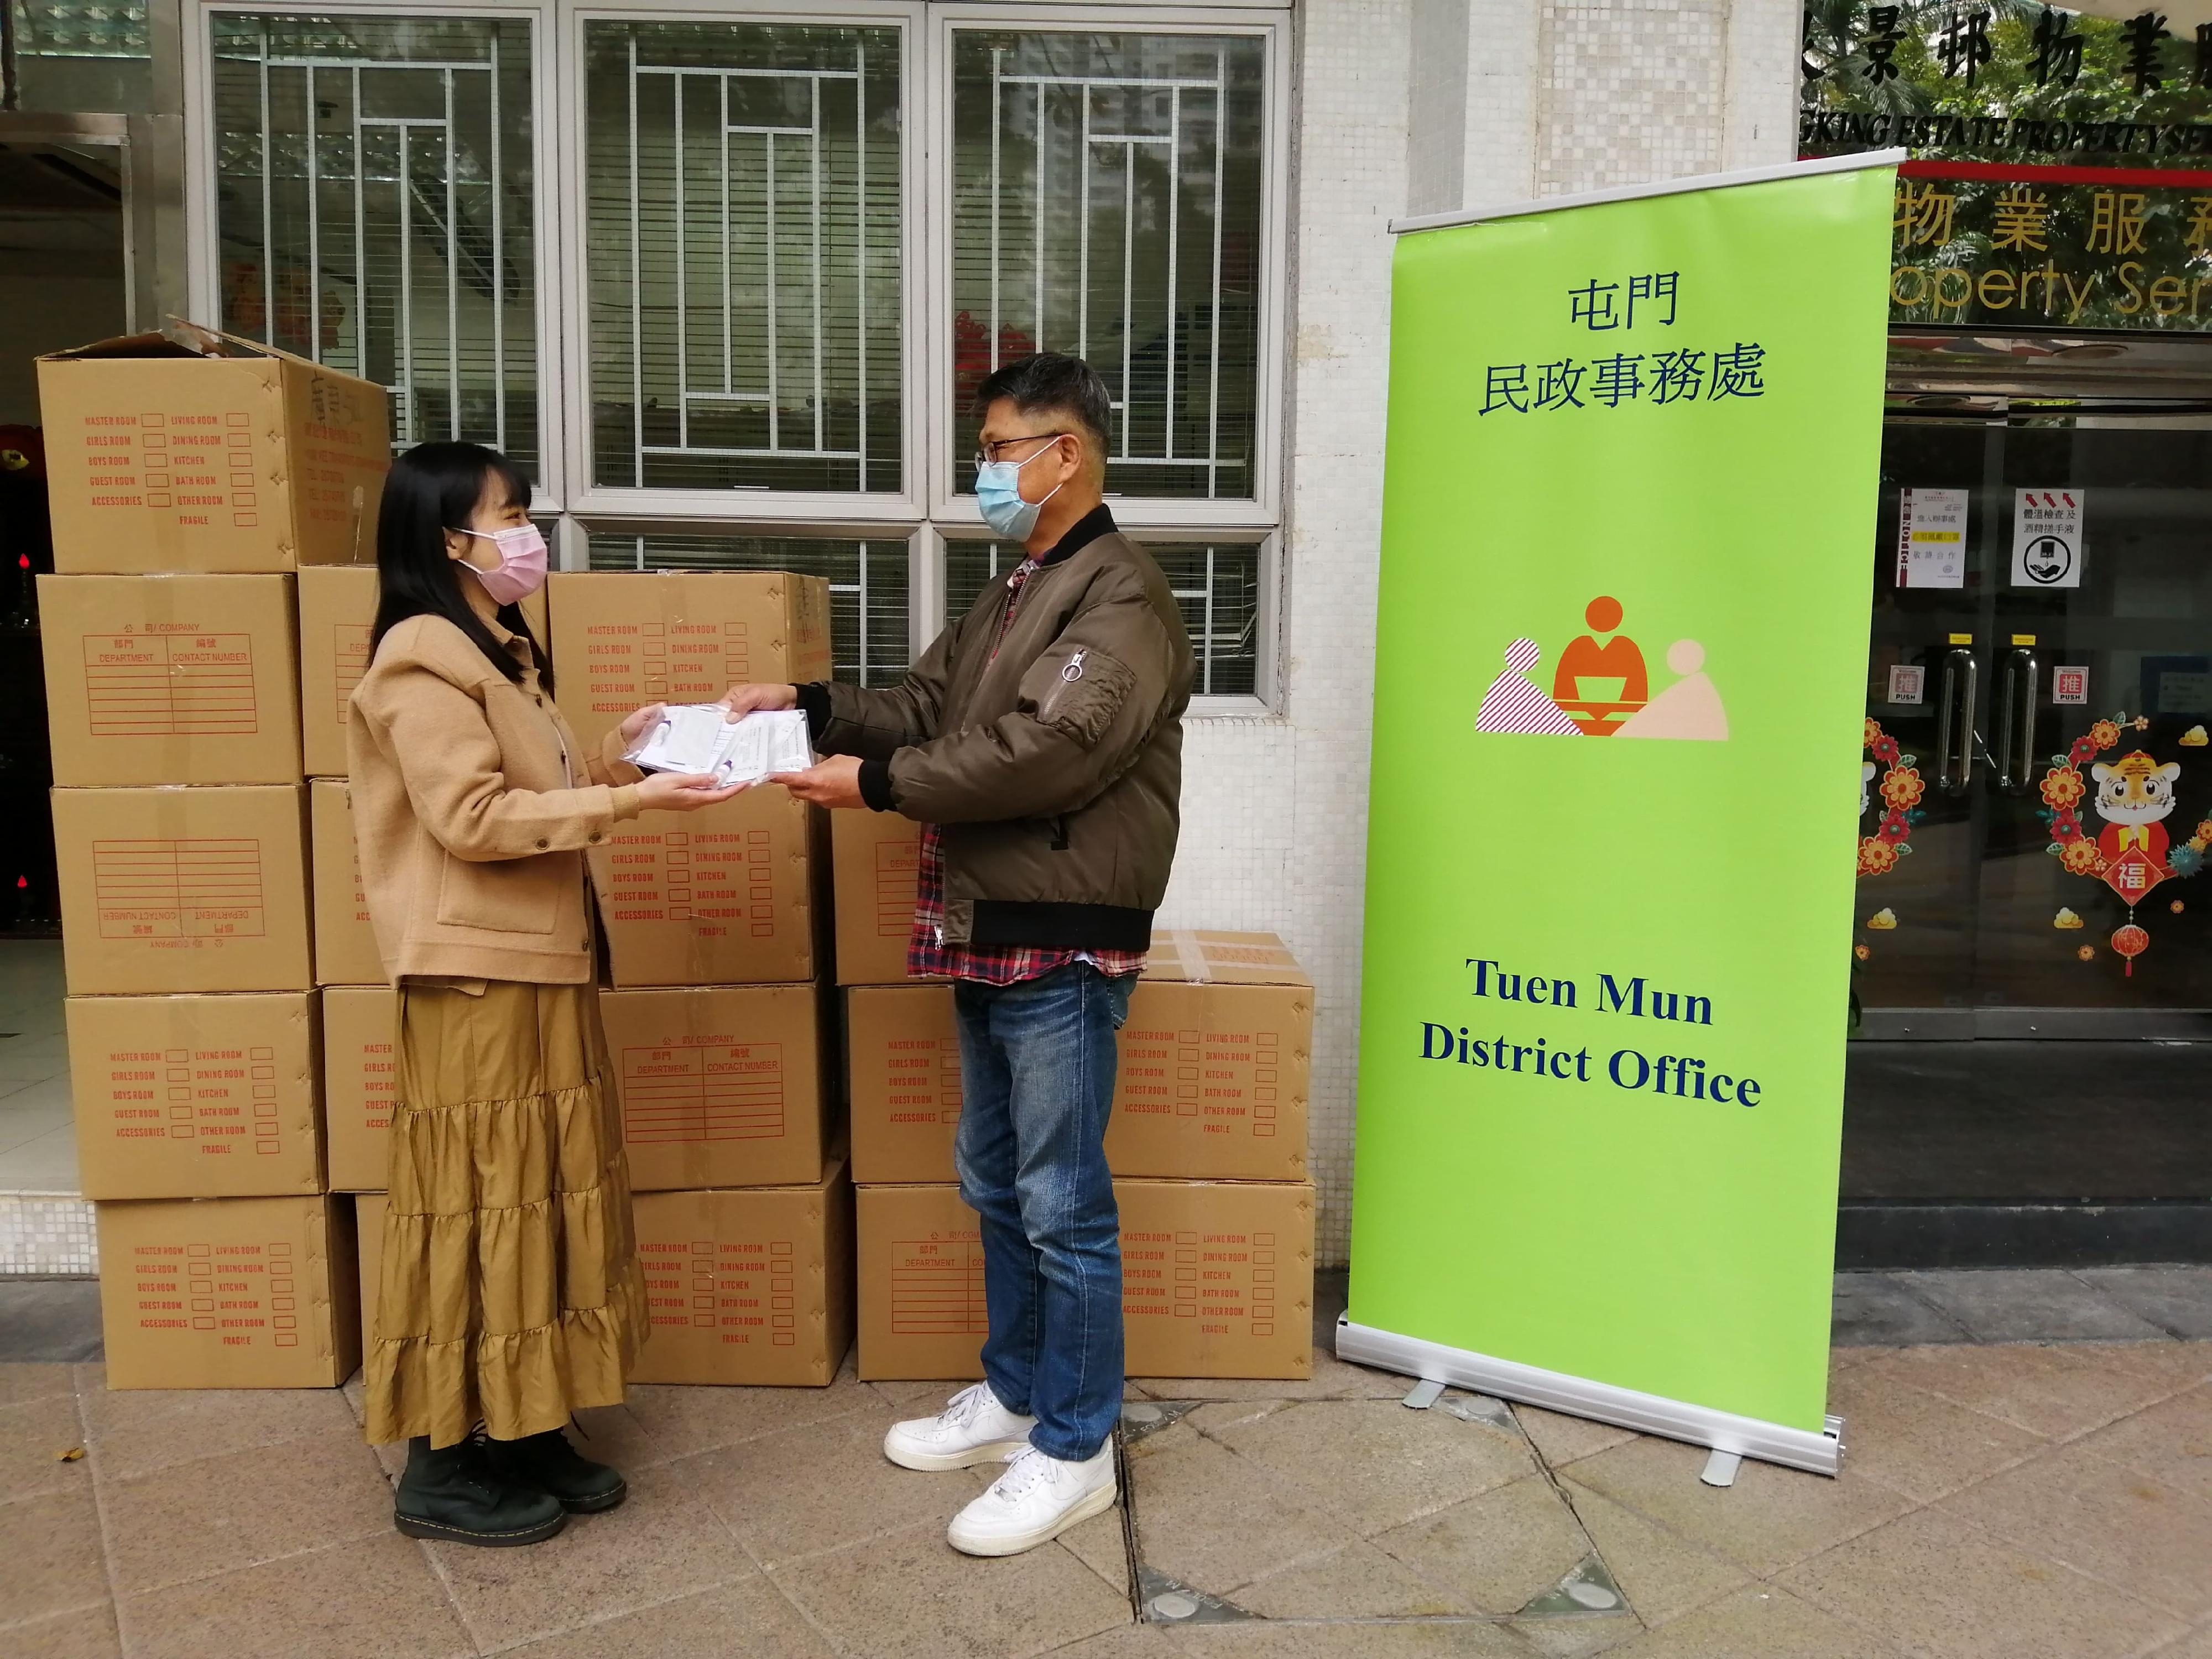 The Tuen Mun District Office today (February 5) distributed COVID-19 rapid test kits to households, cleansing workers and property management staff for voluntary testing through the property management company of Leung King Estate in Tuen Mun.